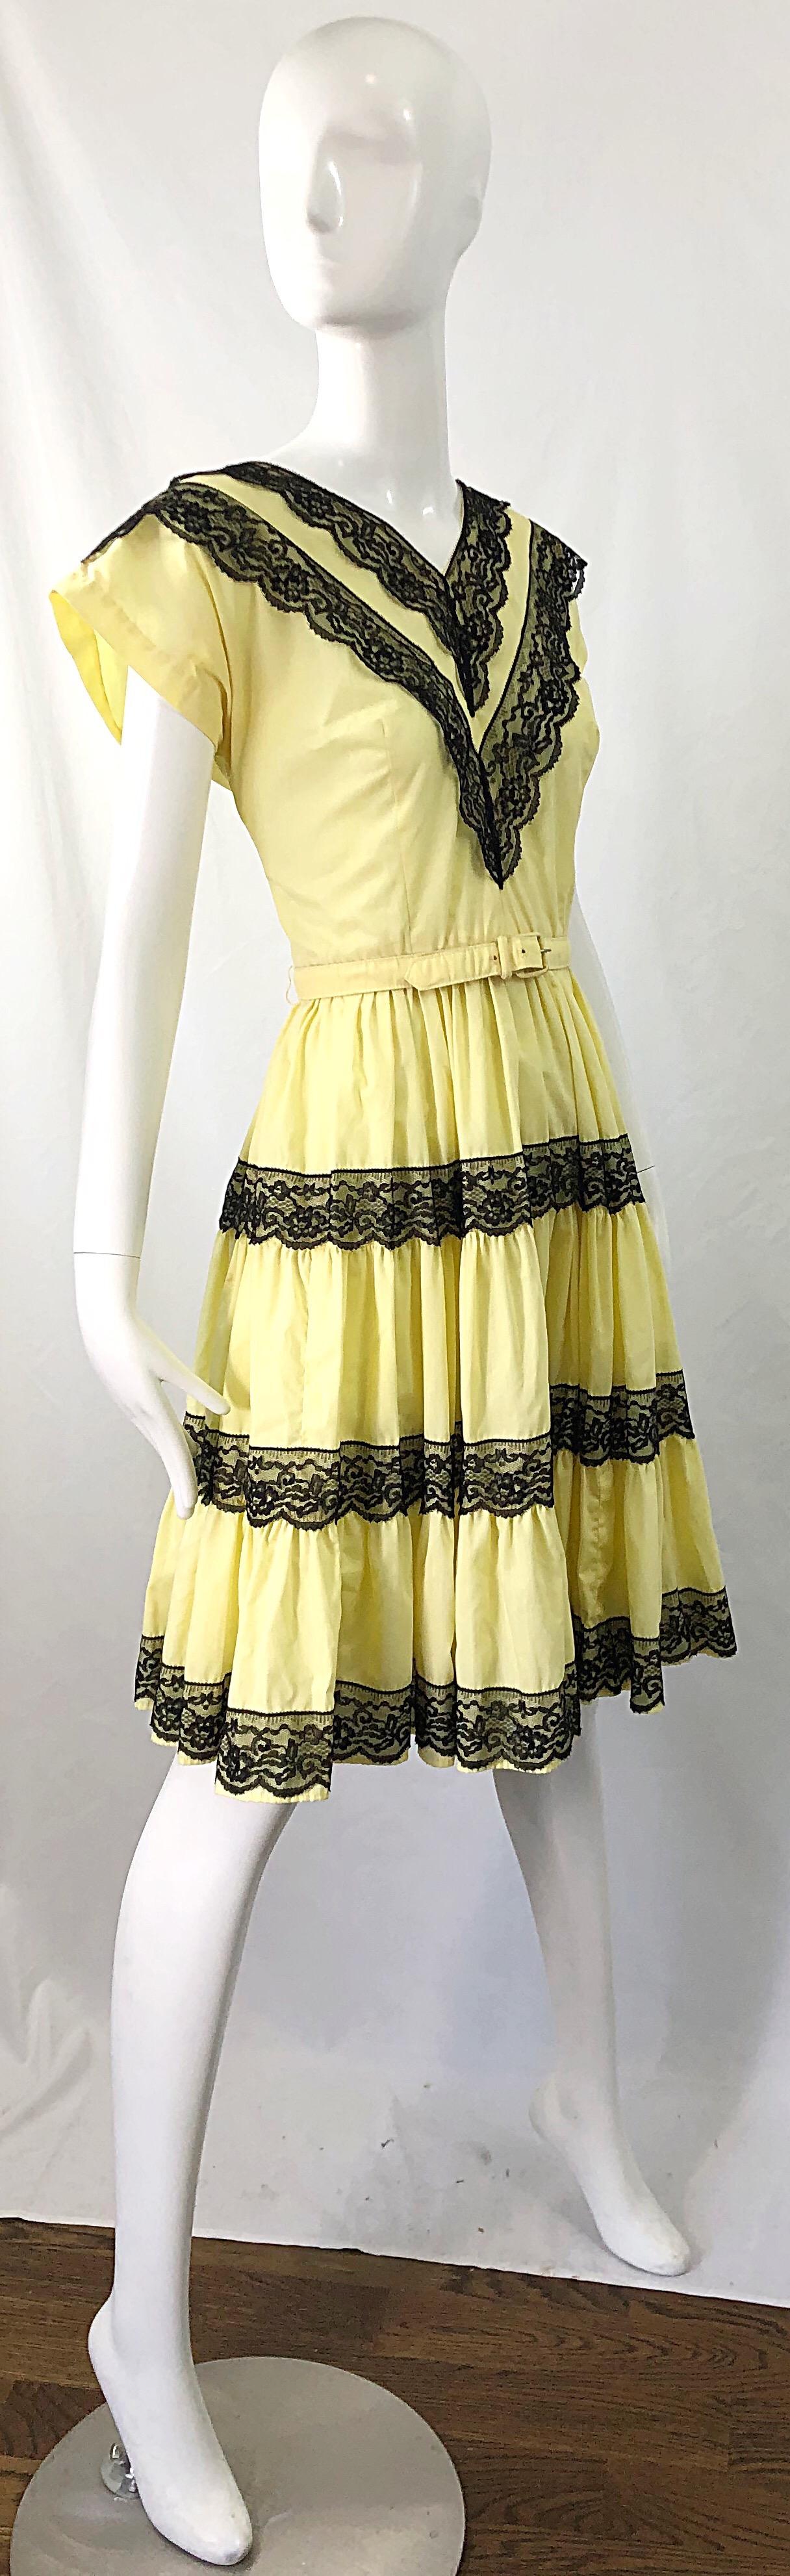 1950s Bettina of Miami Yellow + Black Cotton Lace Fit n' Flare Vintage 50s Dress For Sale 4